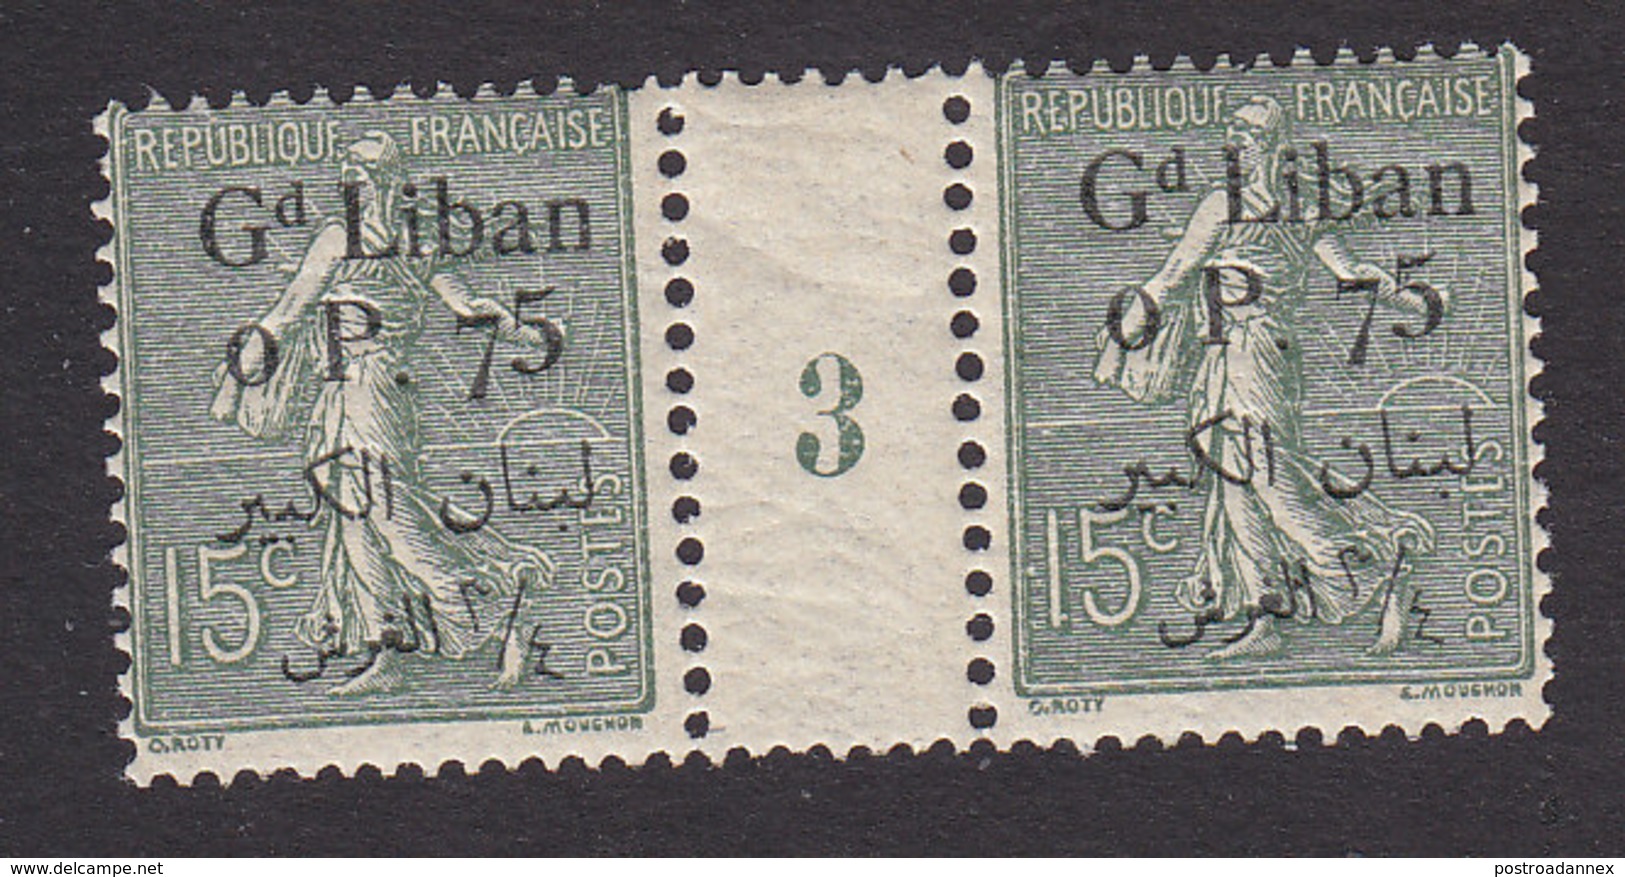 Lebanon, Scott #4, Mint Never Hinged, Stamp Of France Surcharged, Issued 1924 - Unused Stamps